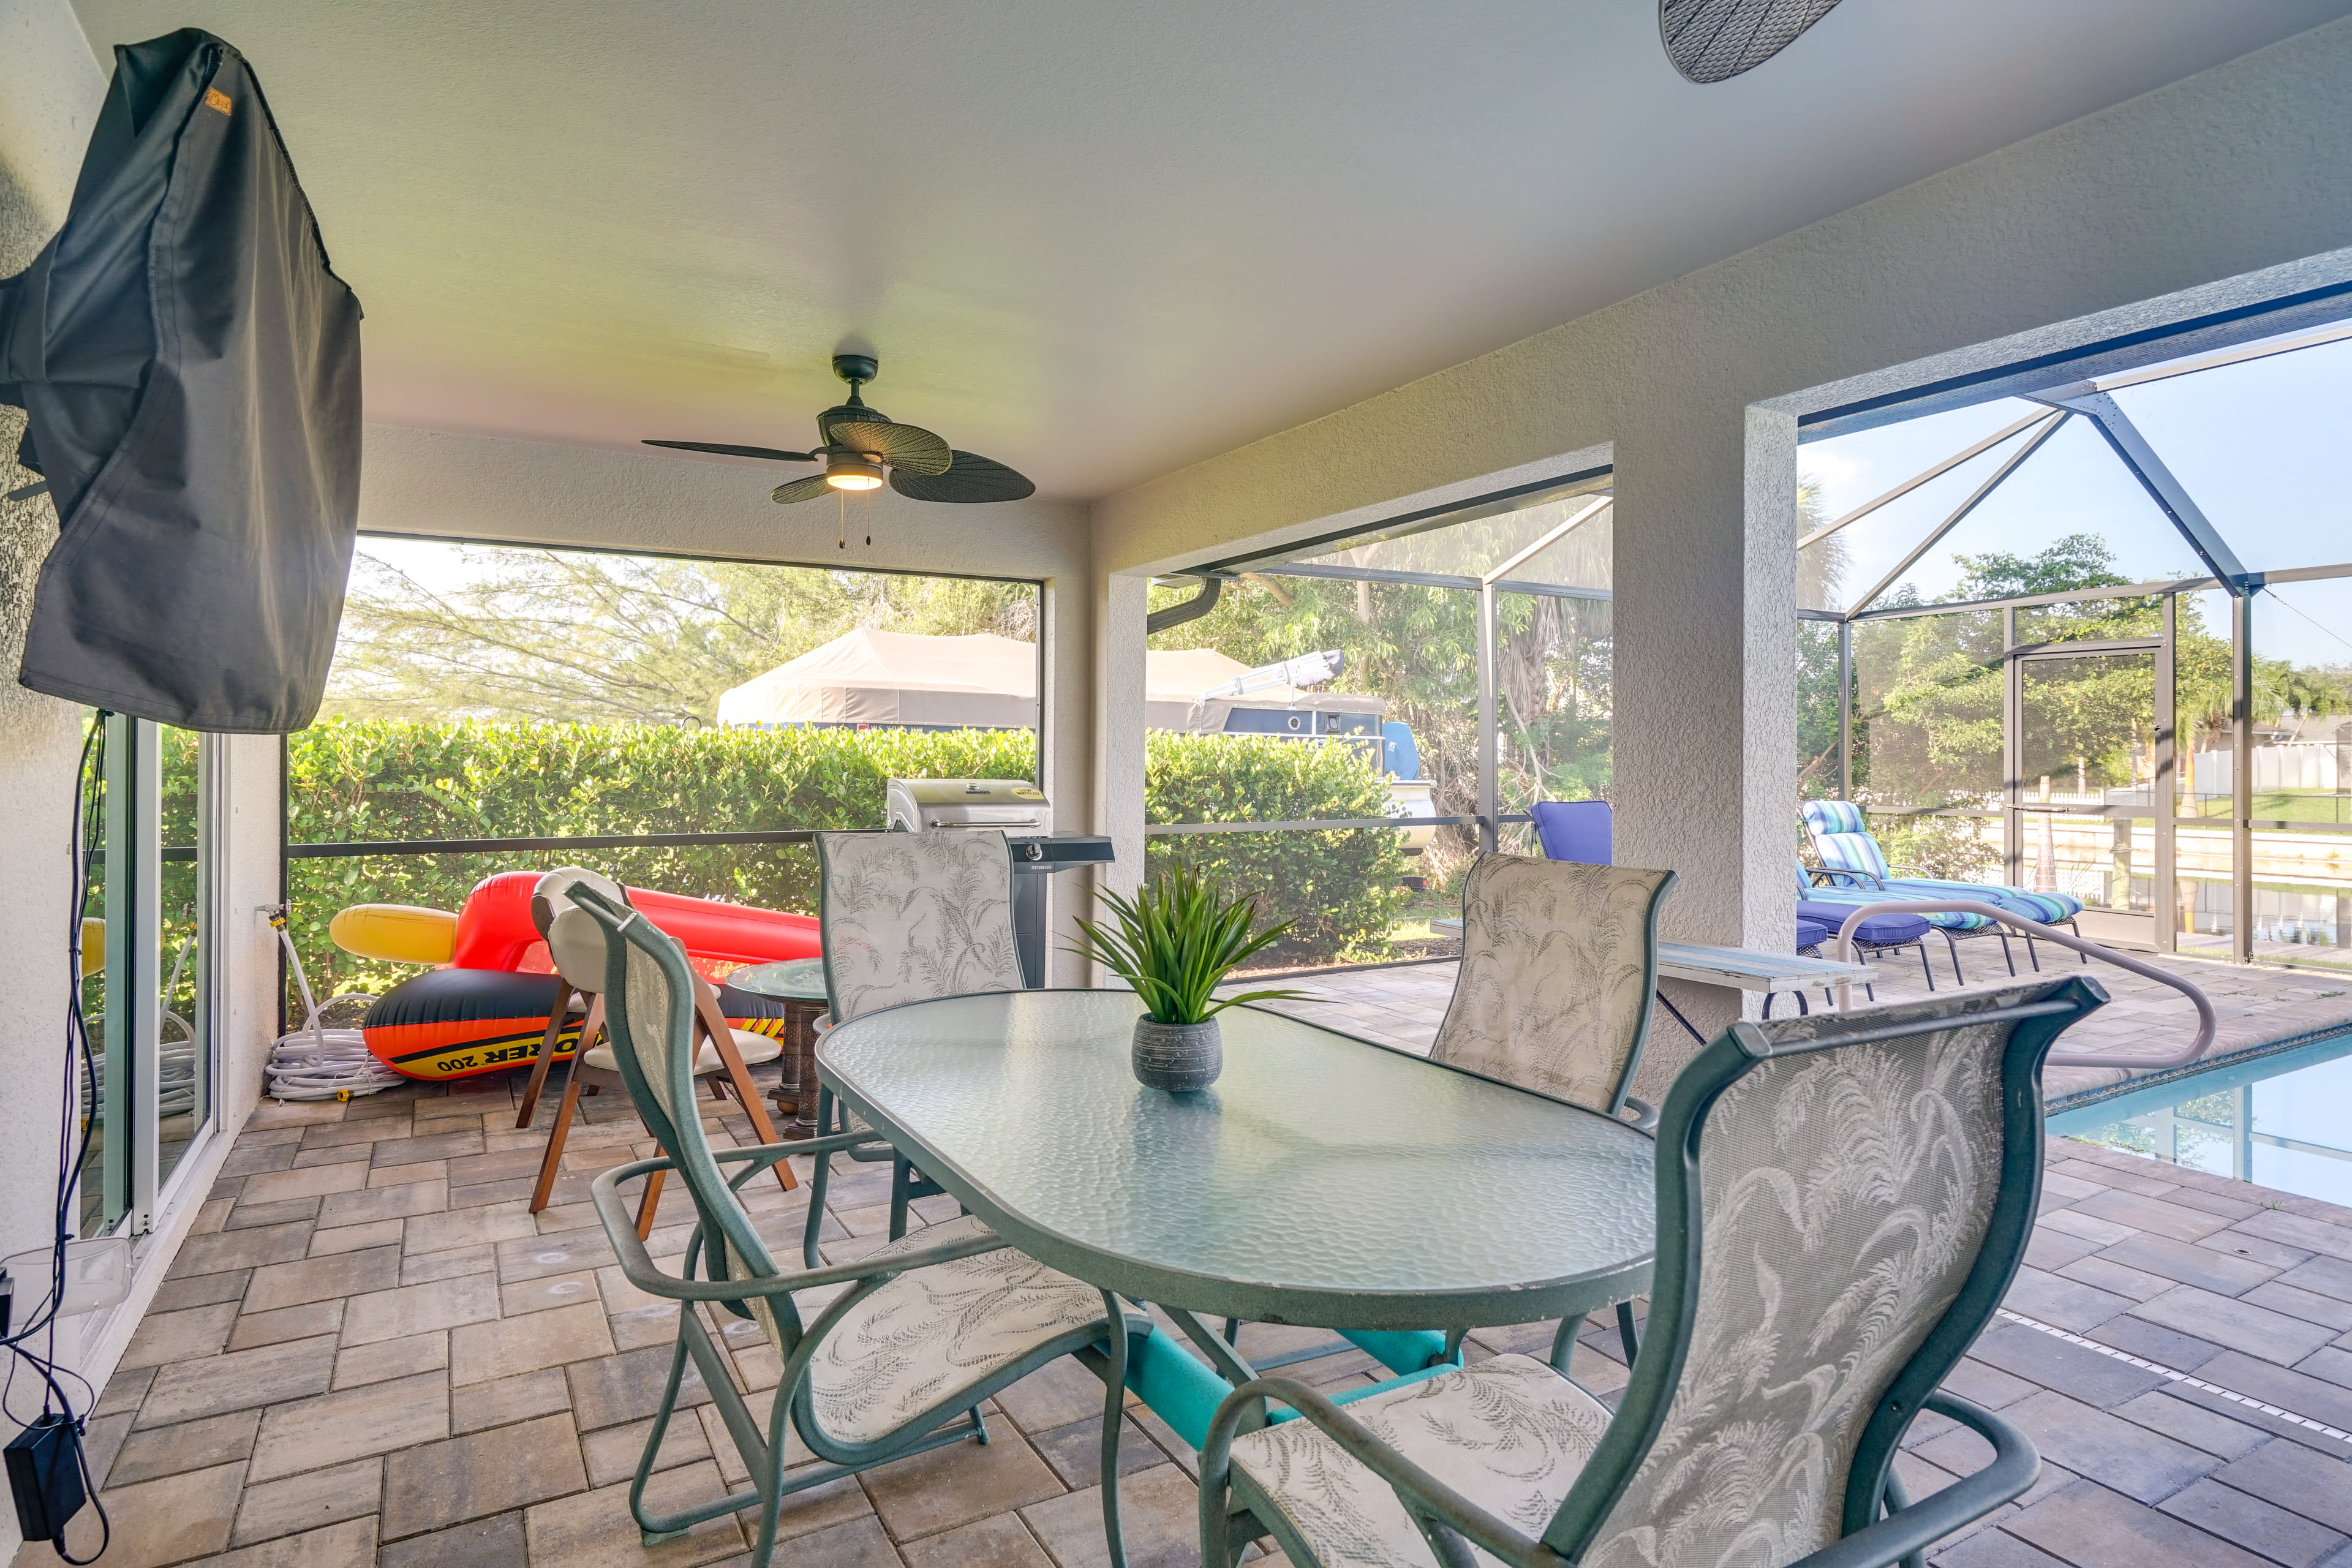 Covered Patio | Gas Grill | Outdoor Dining Area